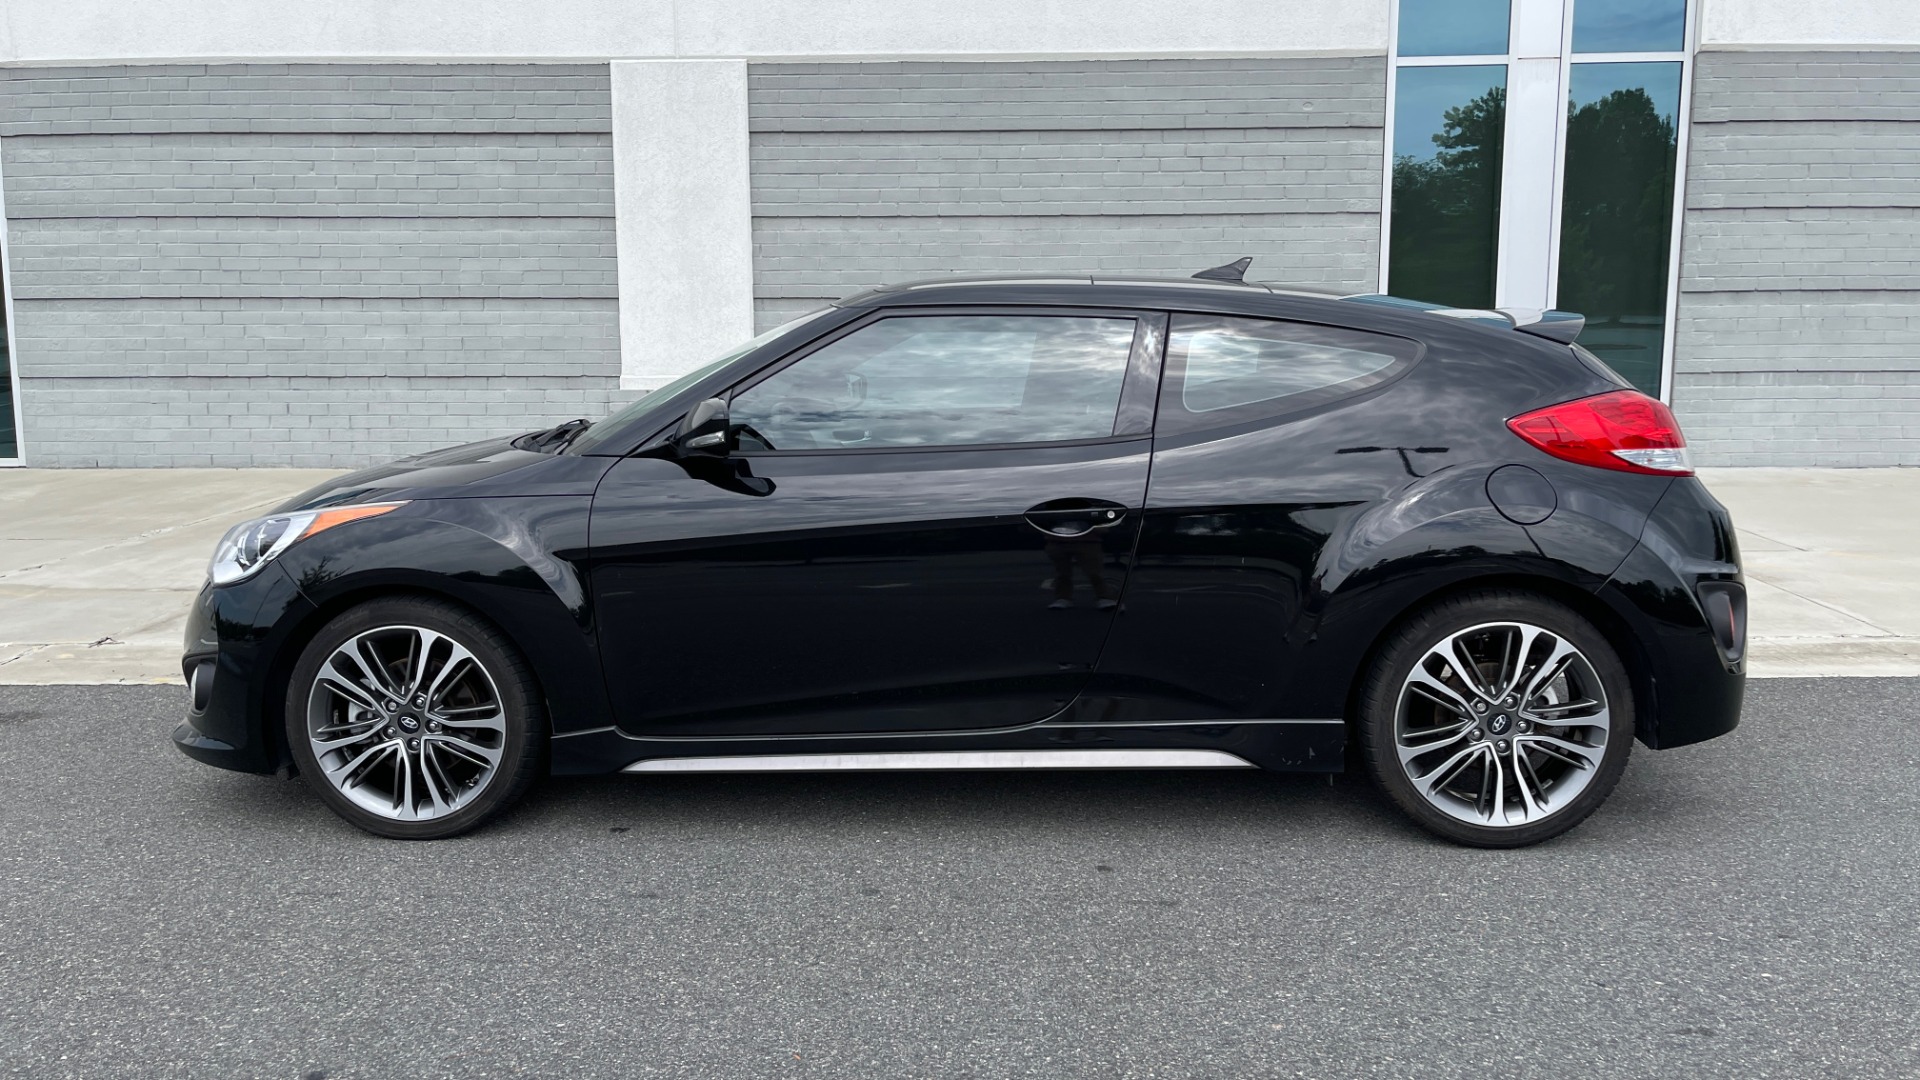 Used 2016 Hyundai VELOSTER TURBO 1.6L / AUTO / NAV / PANO-ROOF / REARVIEW for sale Sold at Formula Imports in Charlotte NC 28227 4